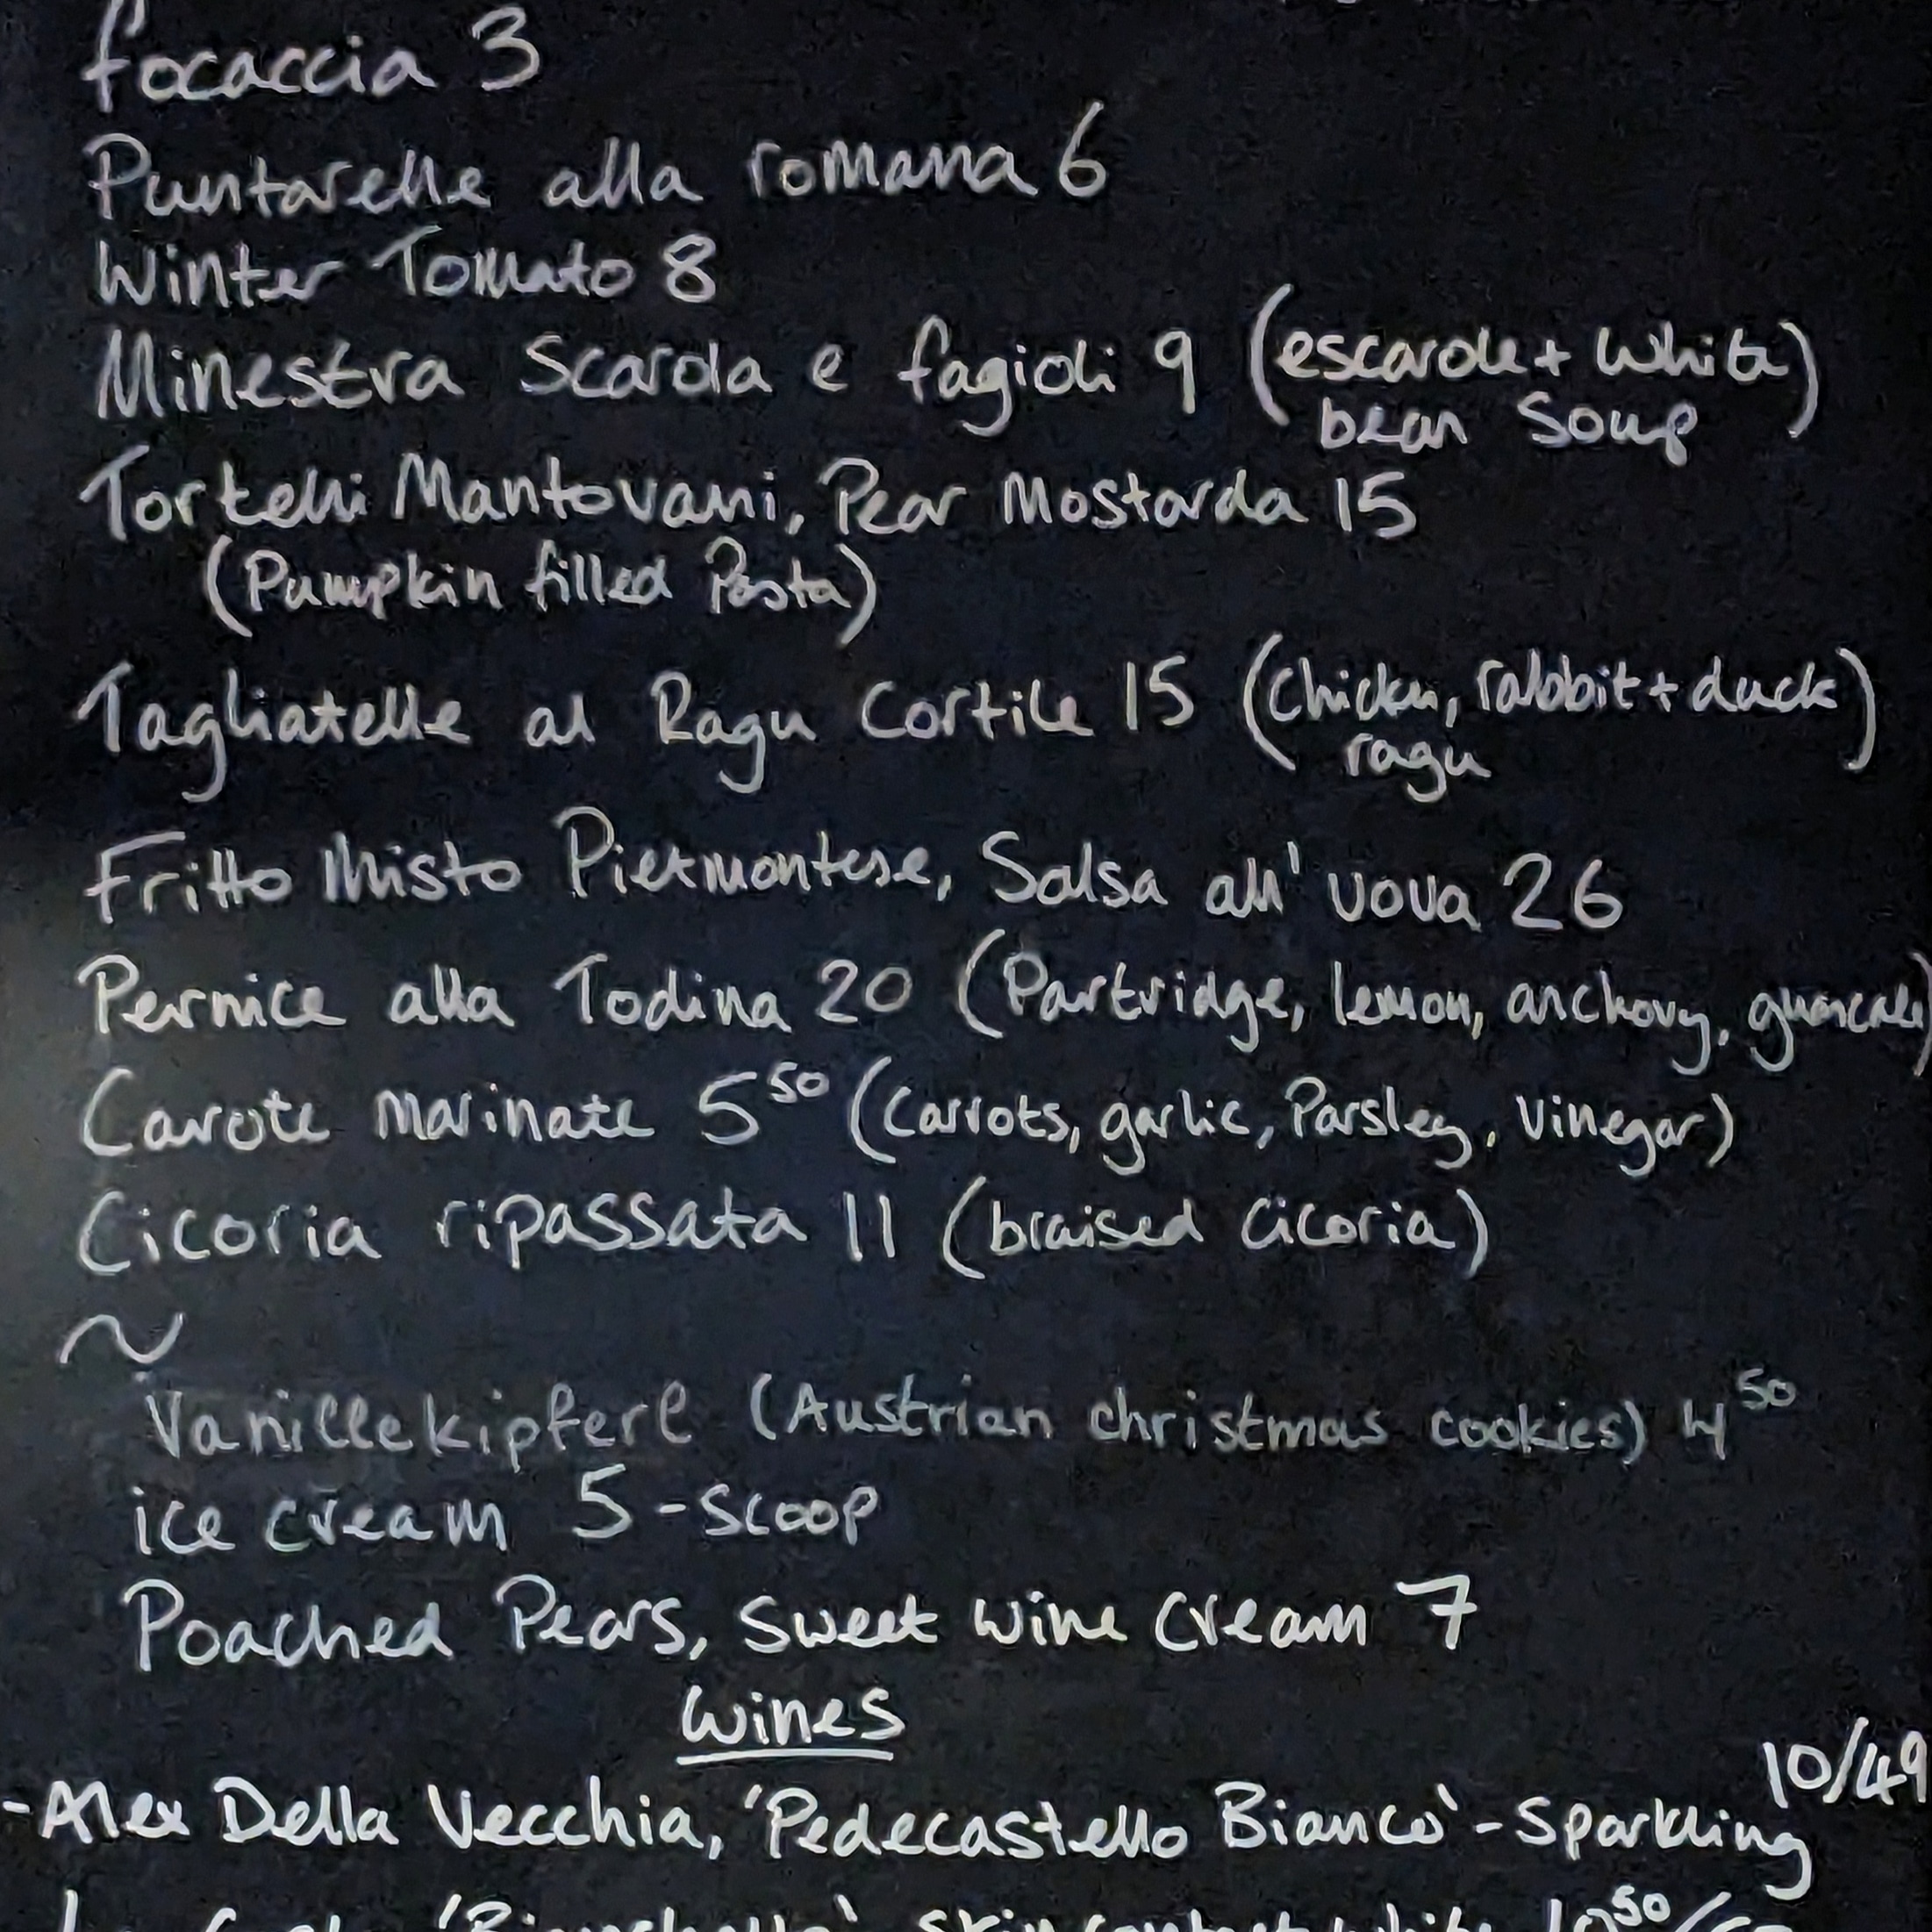 A chalkboard menu at Polentina in east london, one of the most authentic Italian restaurants in london